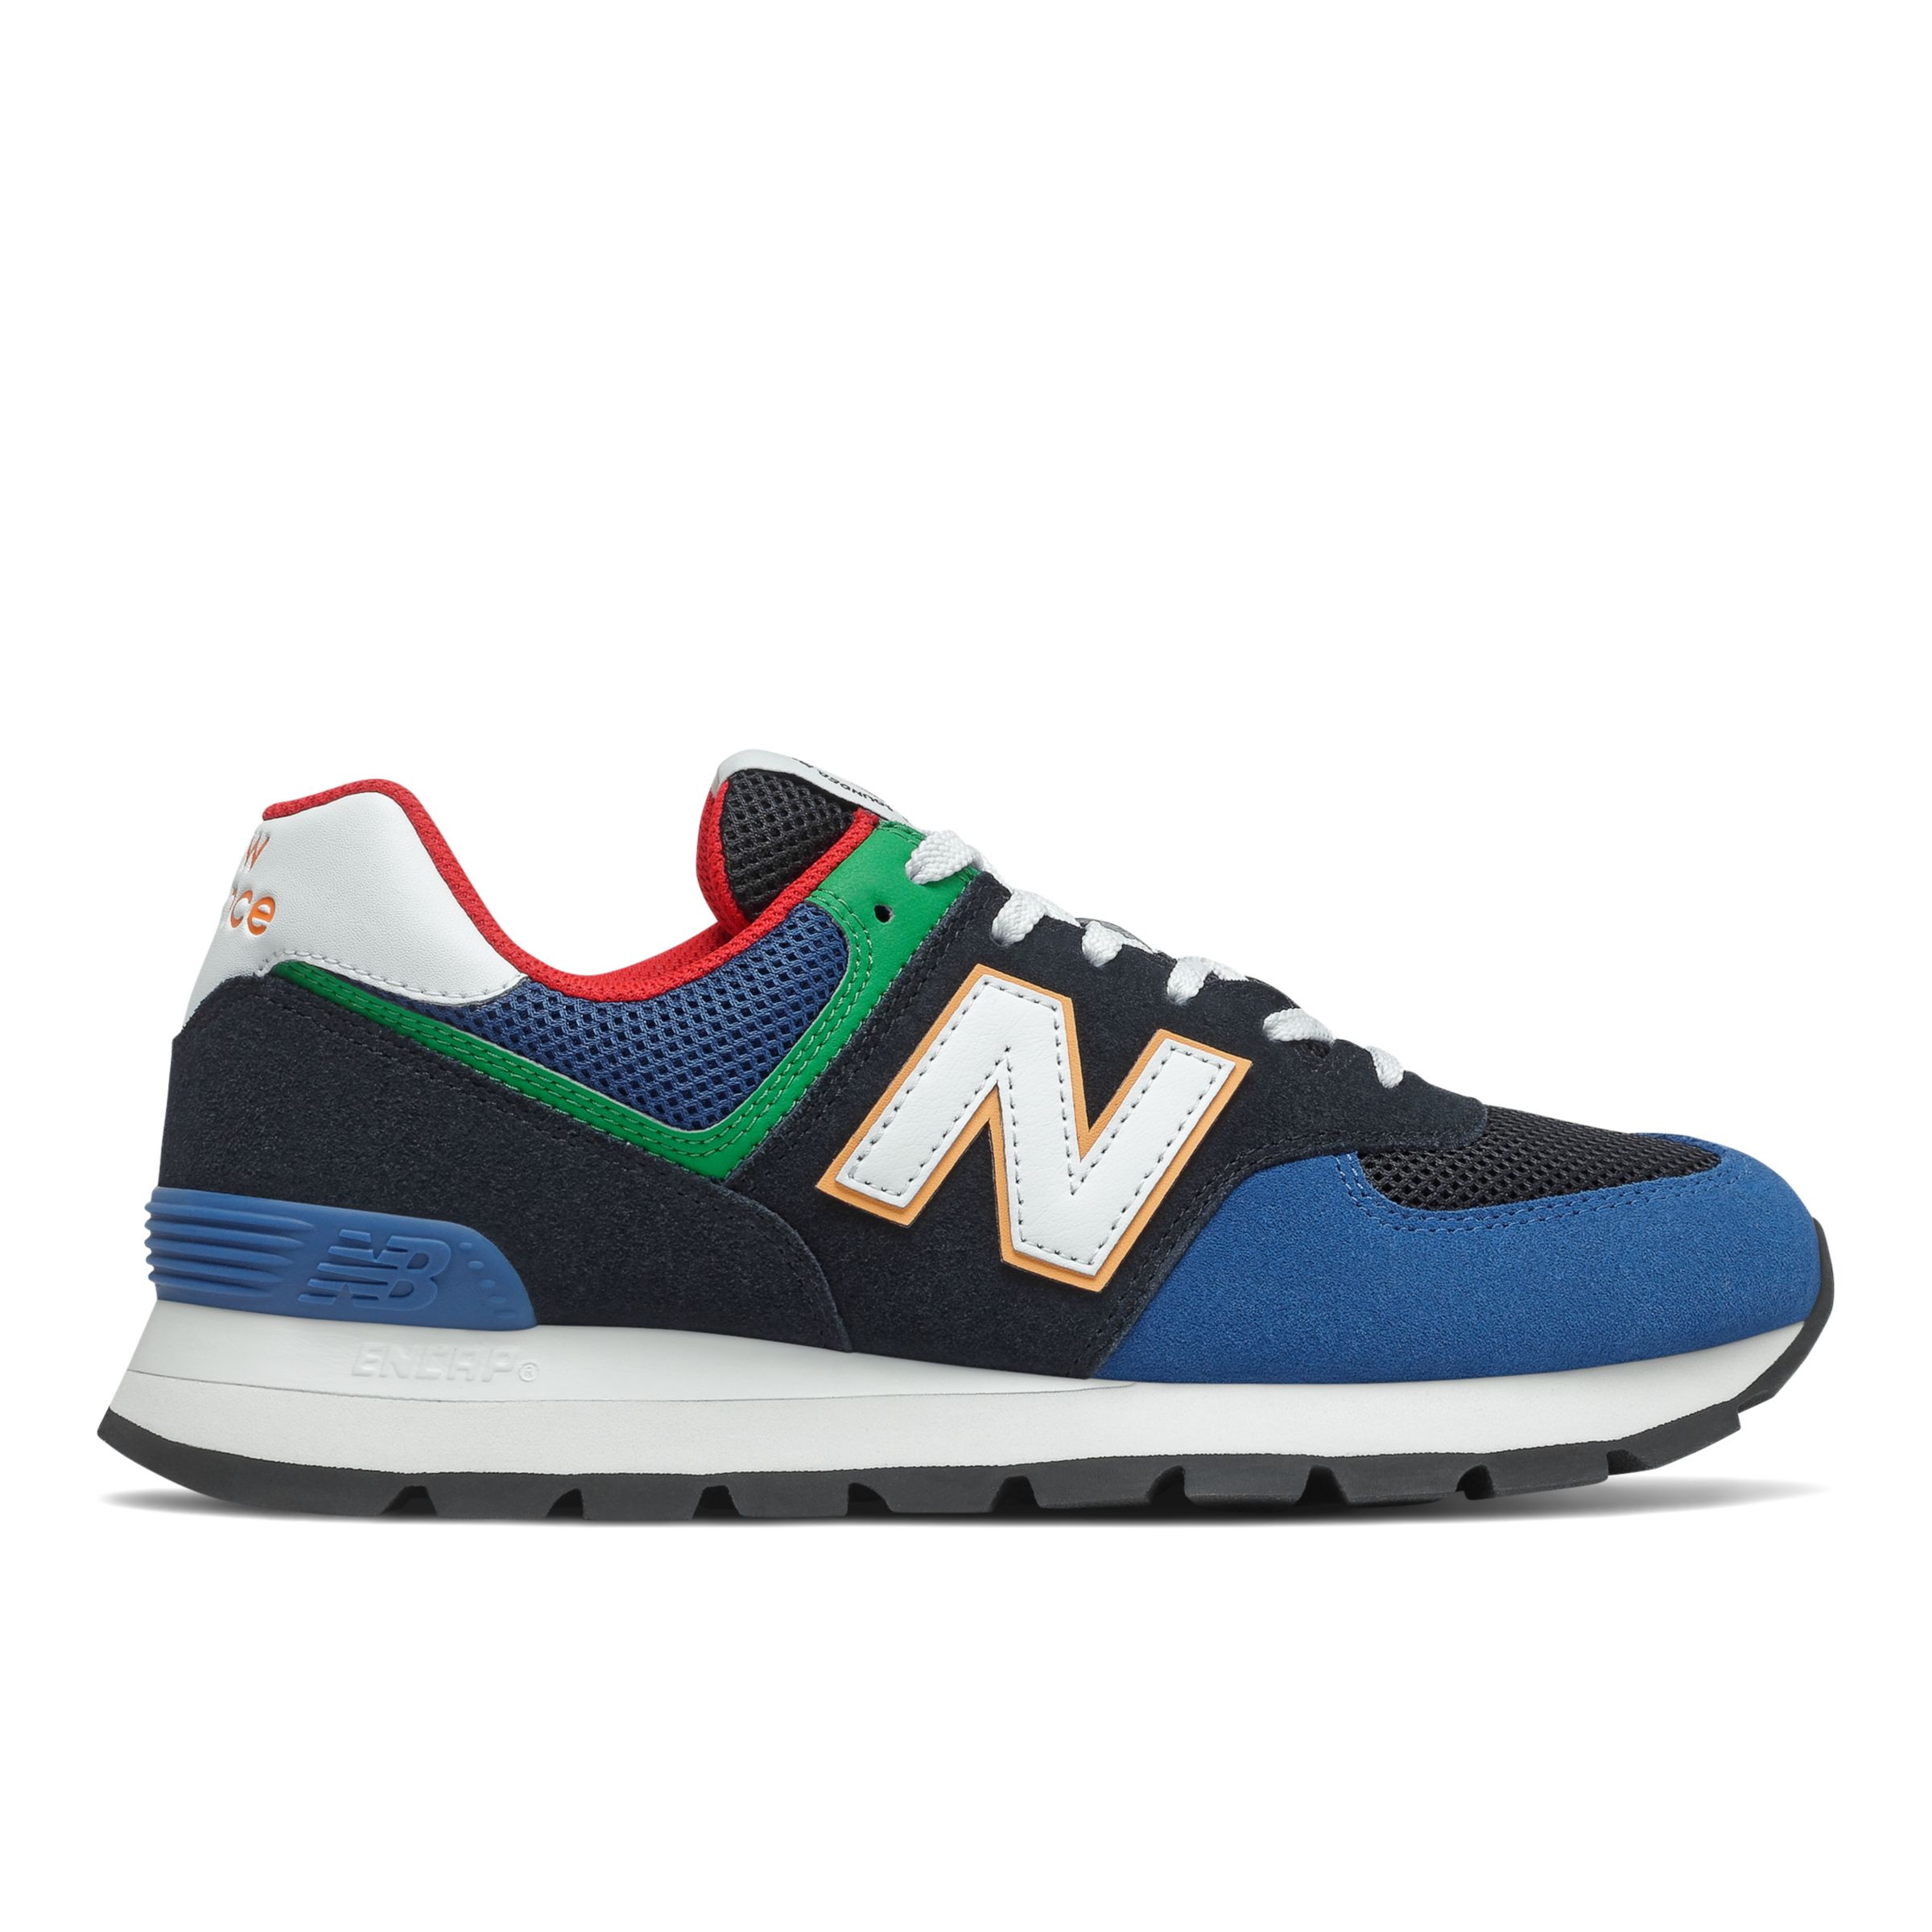 new balance shoes for men 574